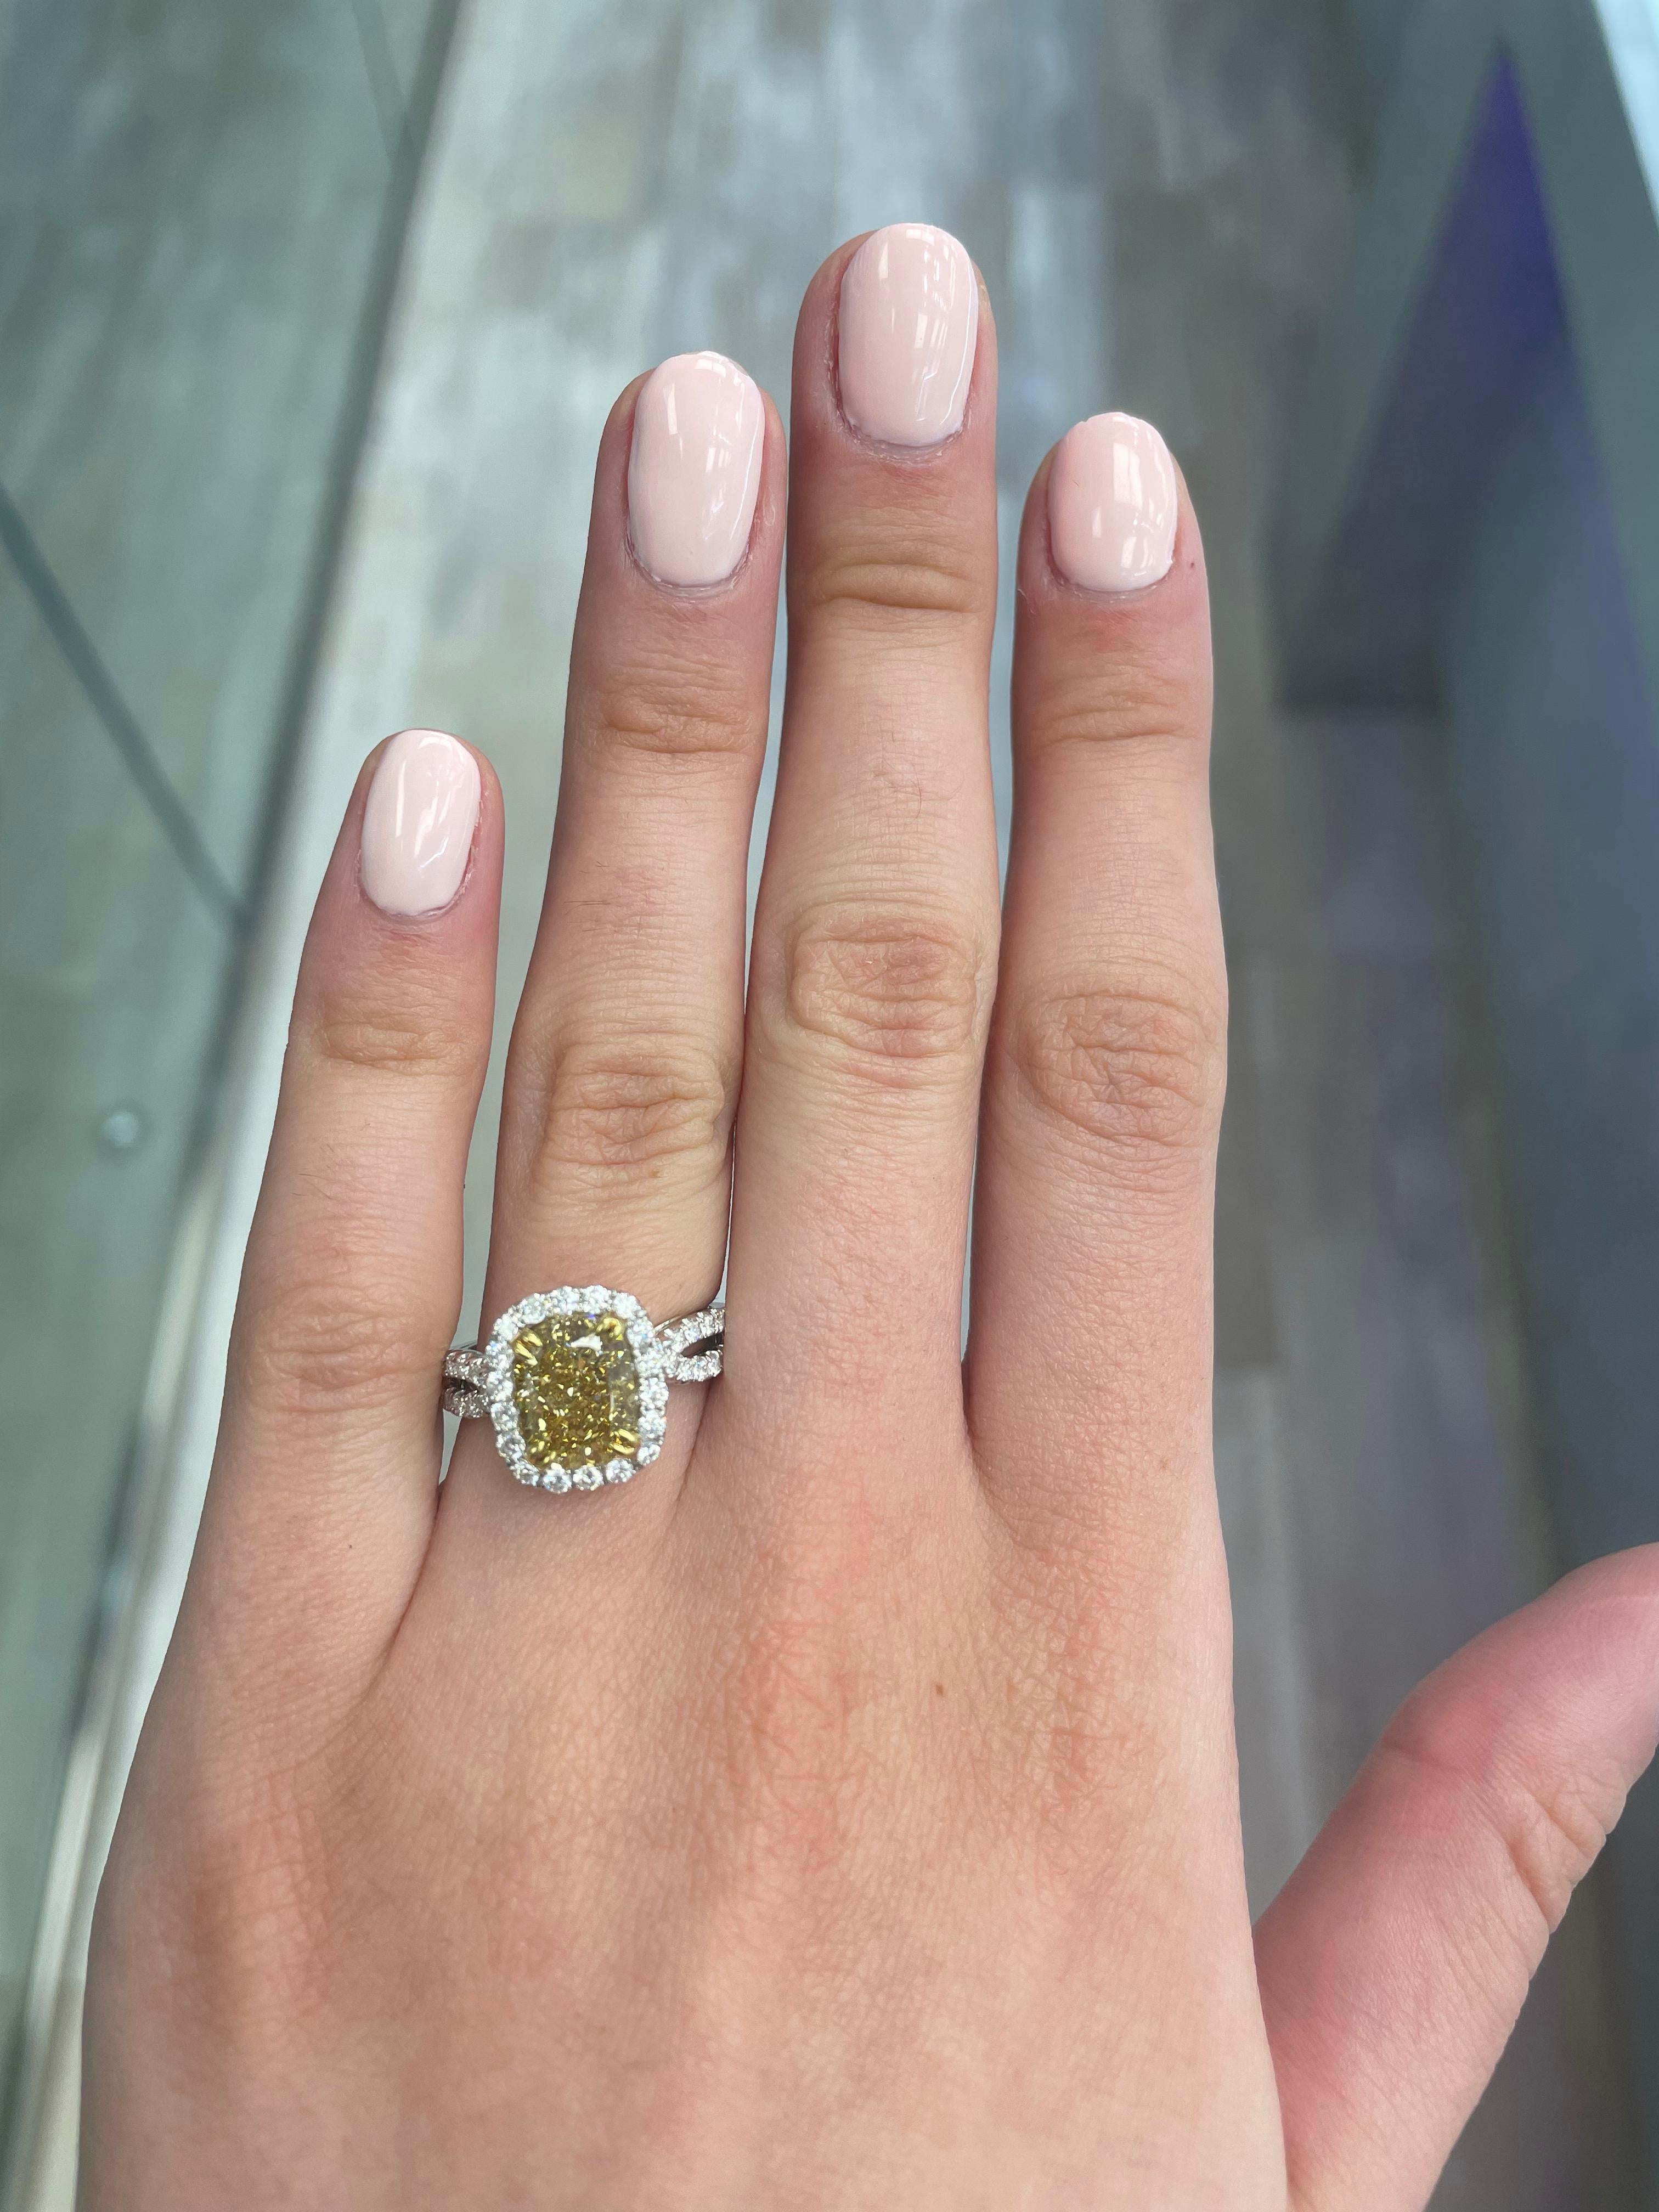 Stunning modern EGL certified yellow diamond with halo ring, two-tone 18k yellow and white gold, split shank. By Alexander Beverly Hills
3.89 carats total diamond weight.
3.07 carat cushion cut Fancy Yellow color and VS2 clarity diamond, EGL graded.